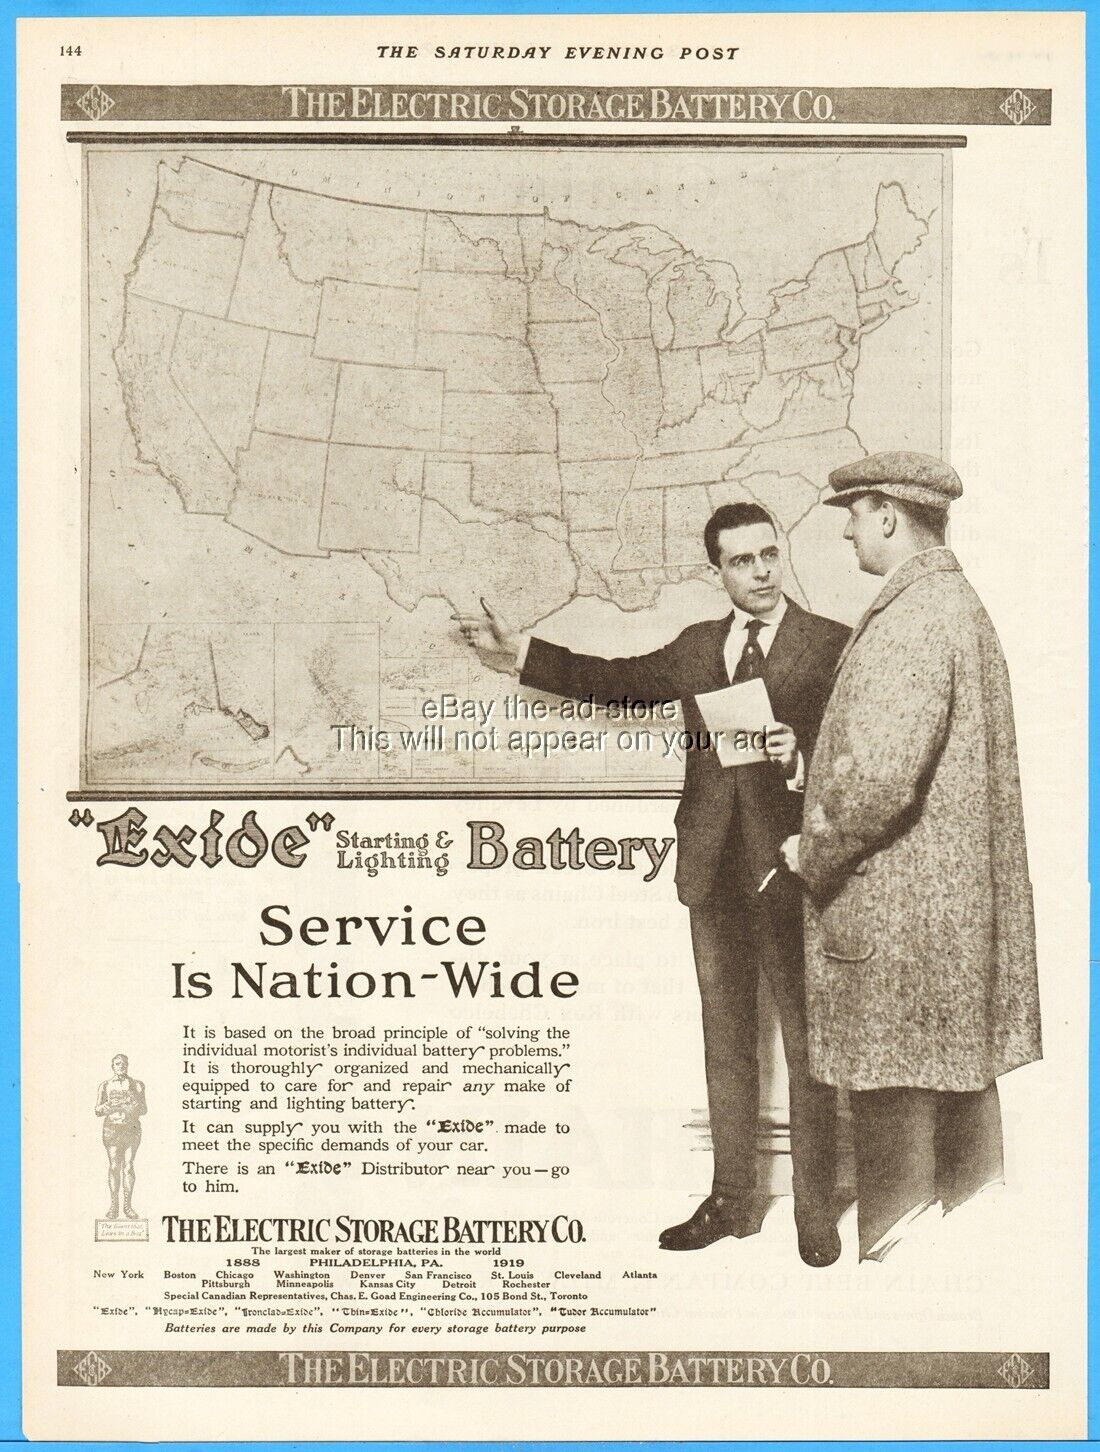 1919 Electric Storage Battery Co Ad Philadelphia PA Exide Service Nationwide Map